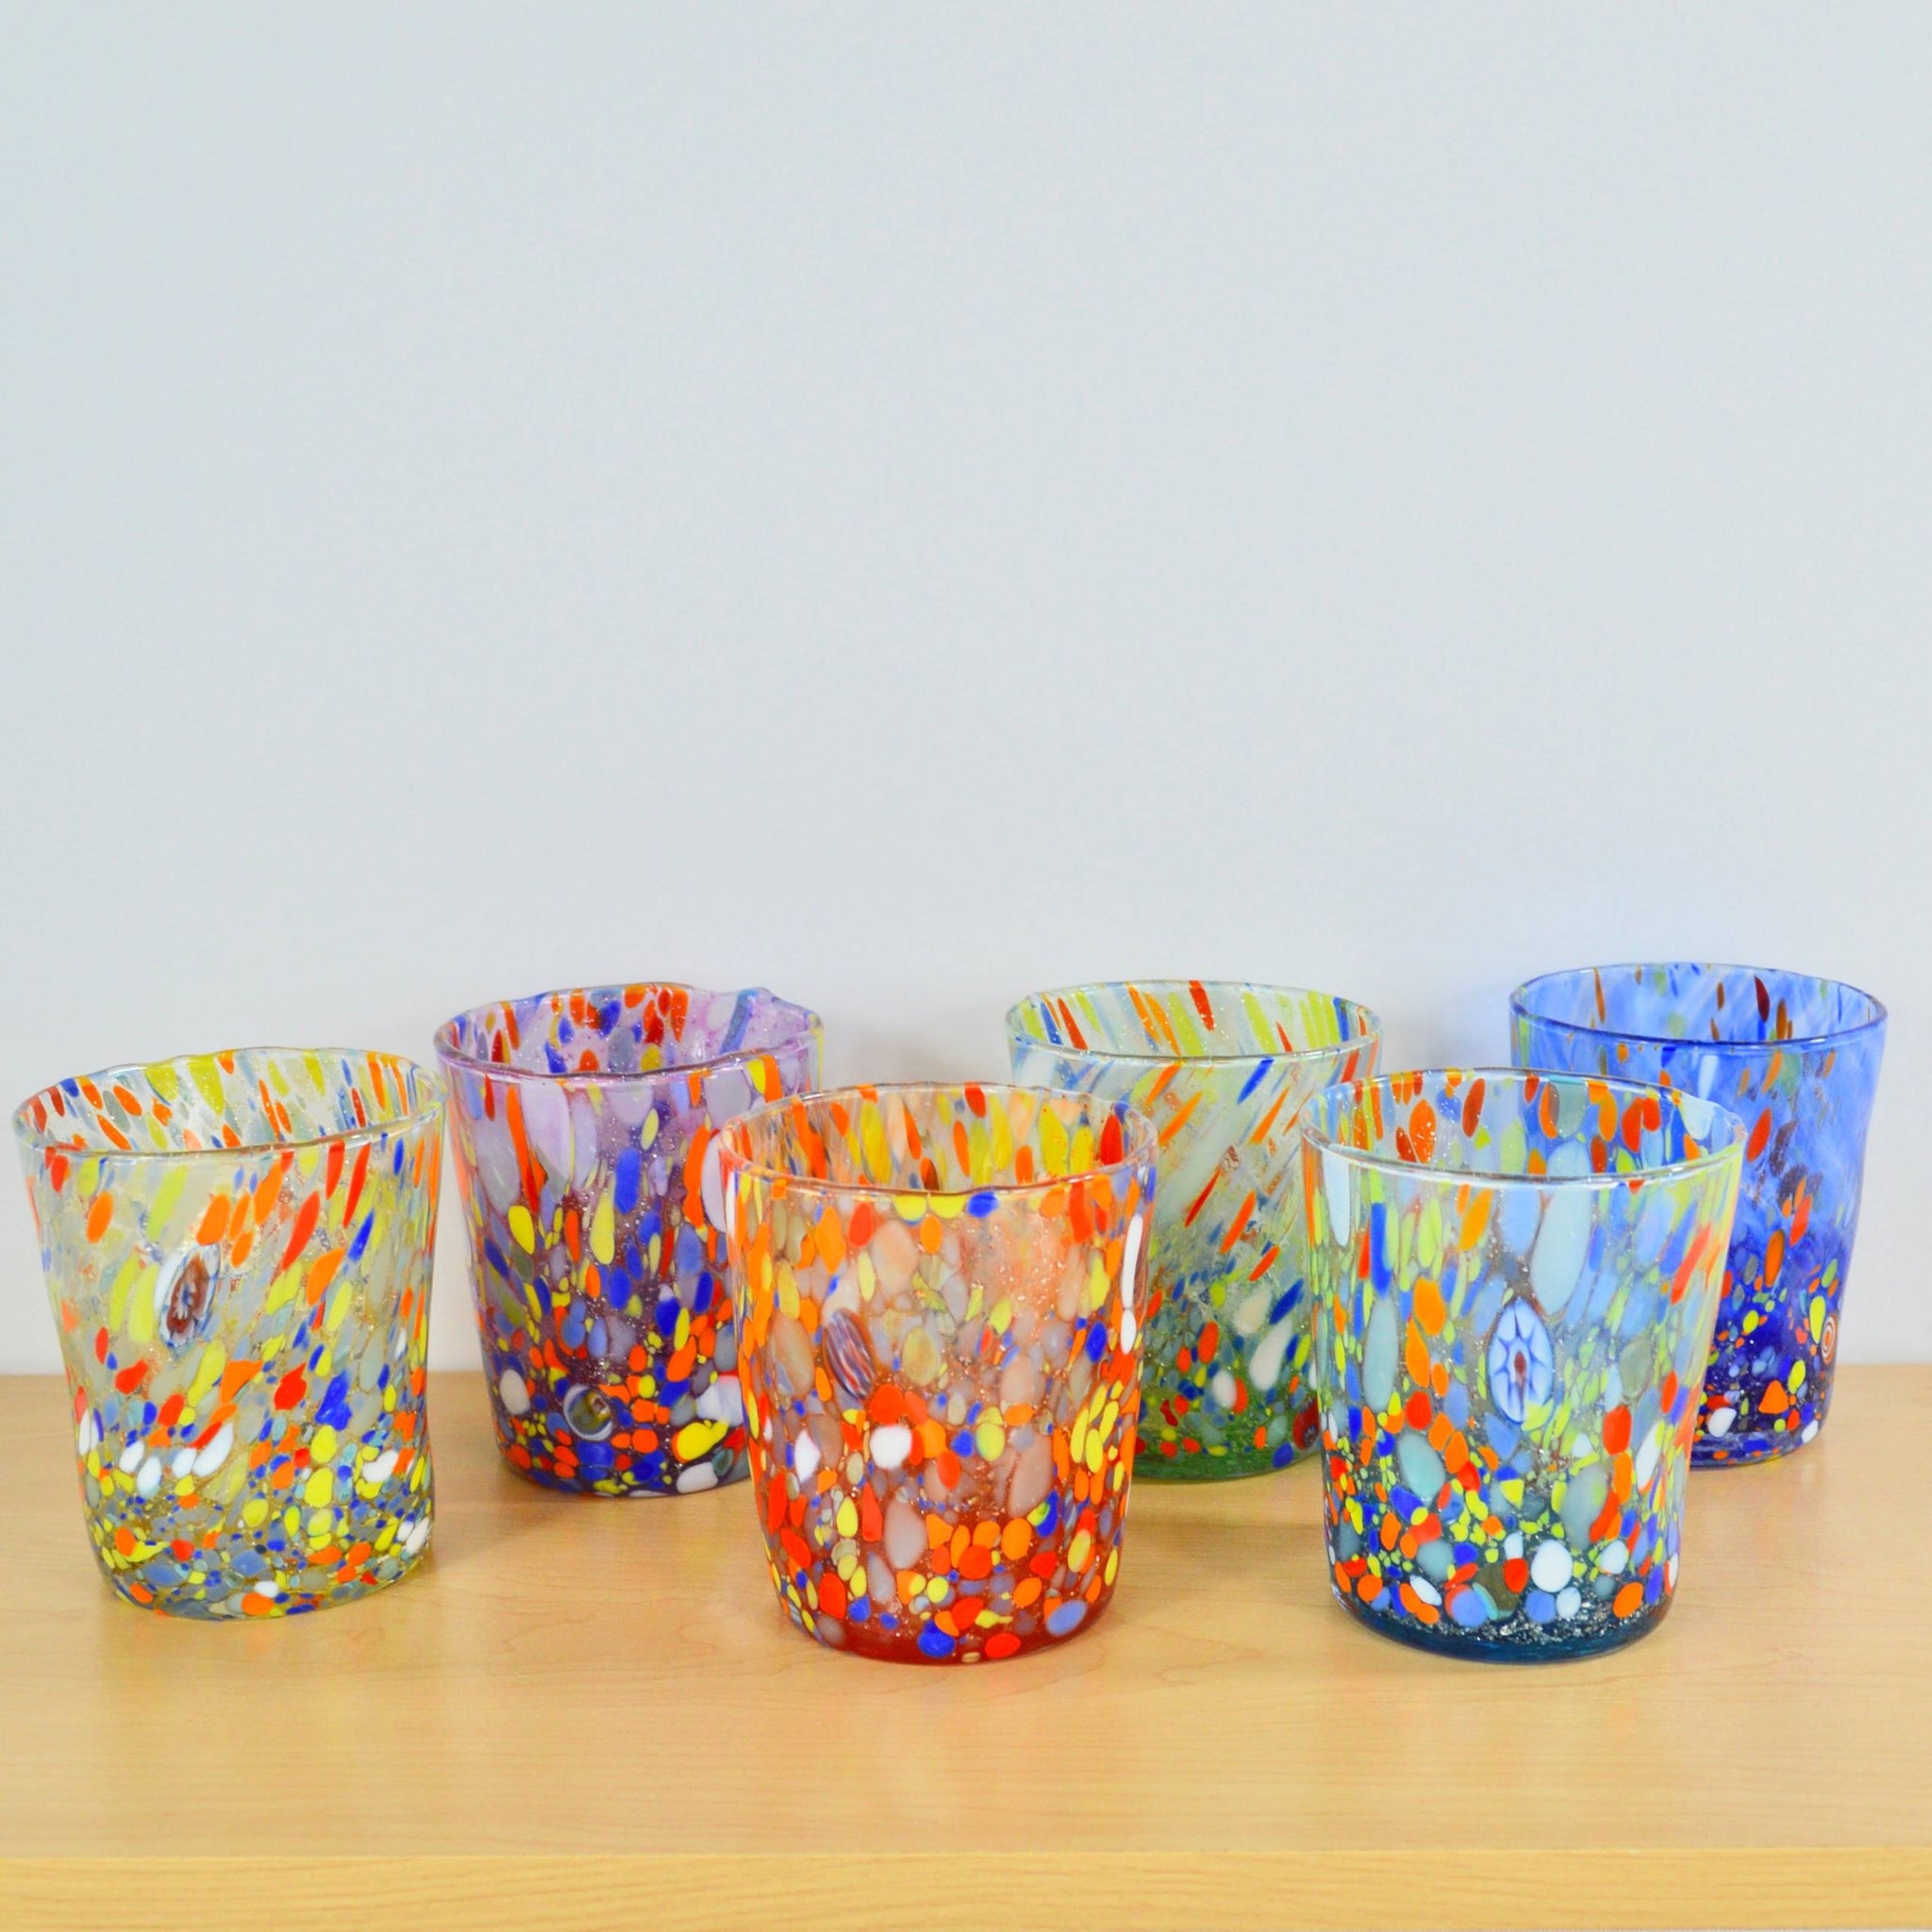 Franco Multi-Colored Glass Drinking Glasses, Set of 6, Made in Murano